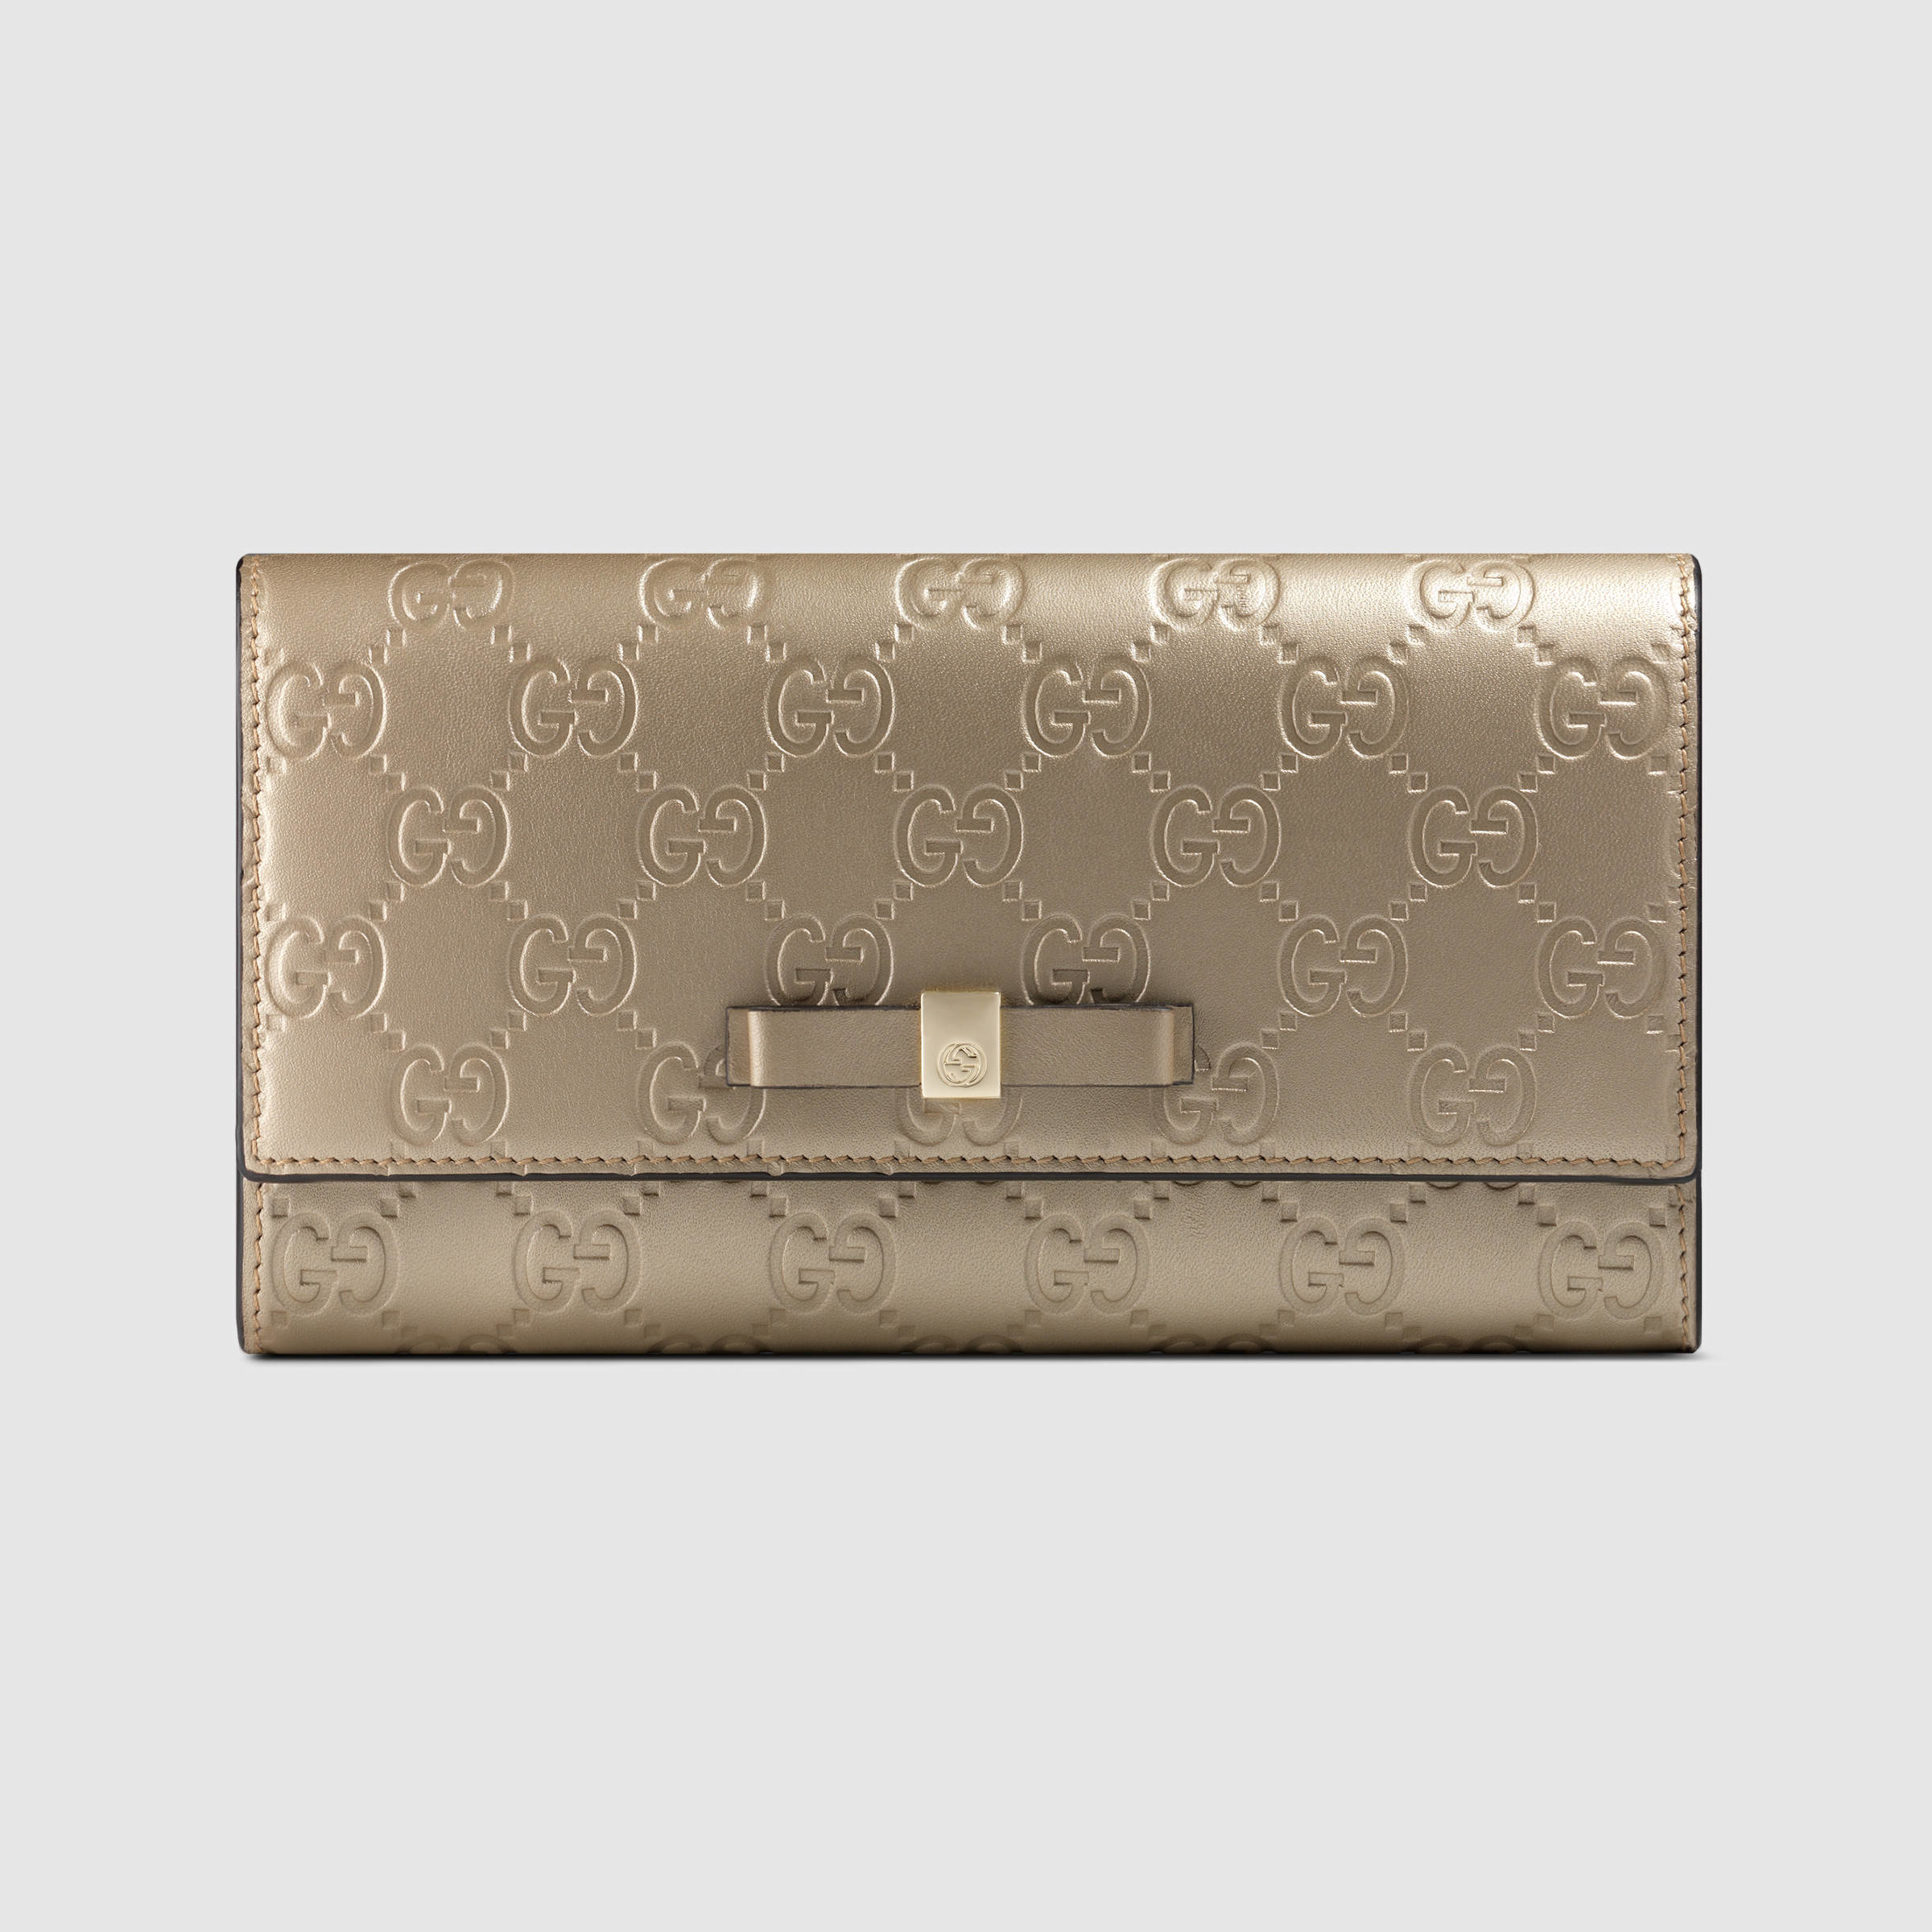 gucci gold wallet, OFF 78%,www 